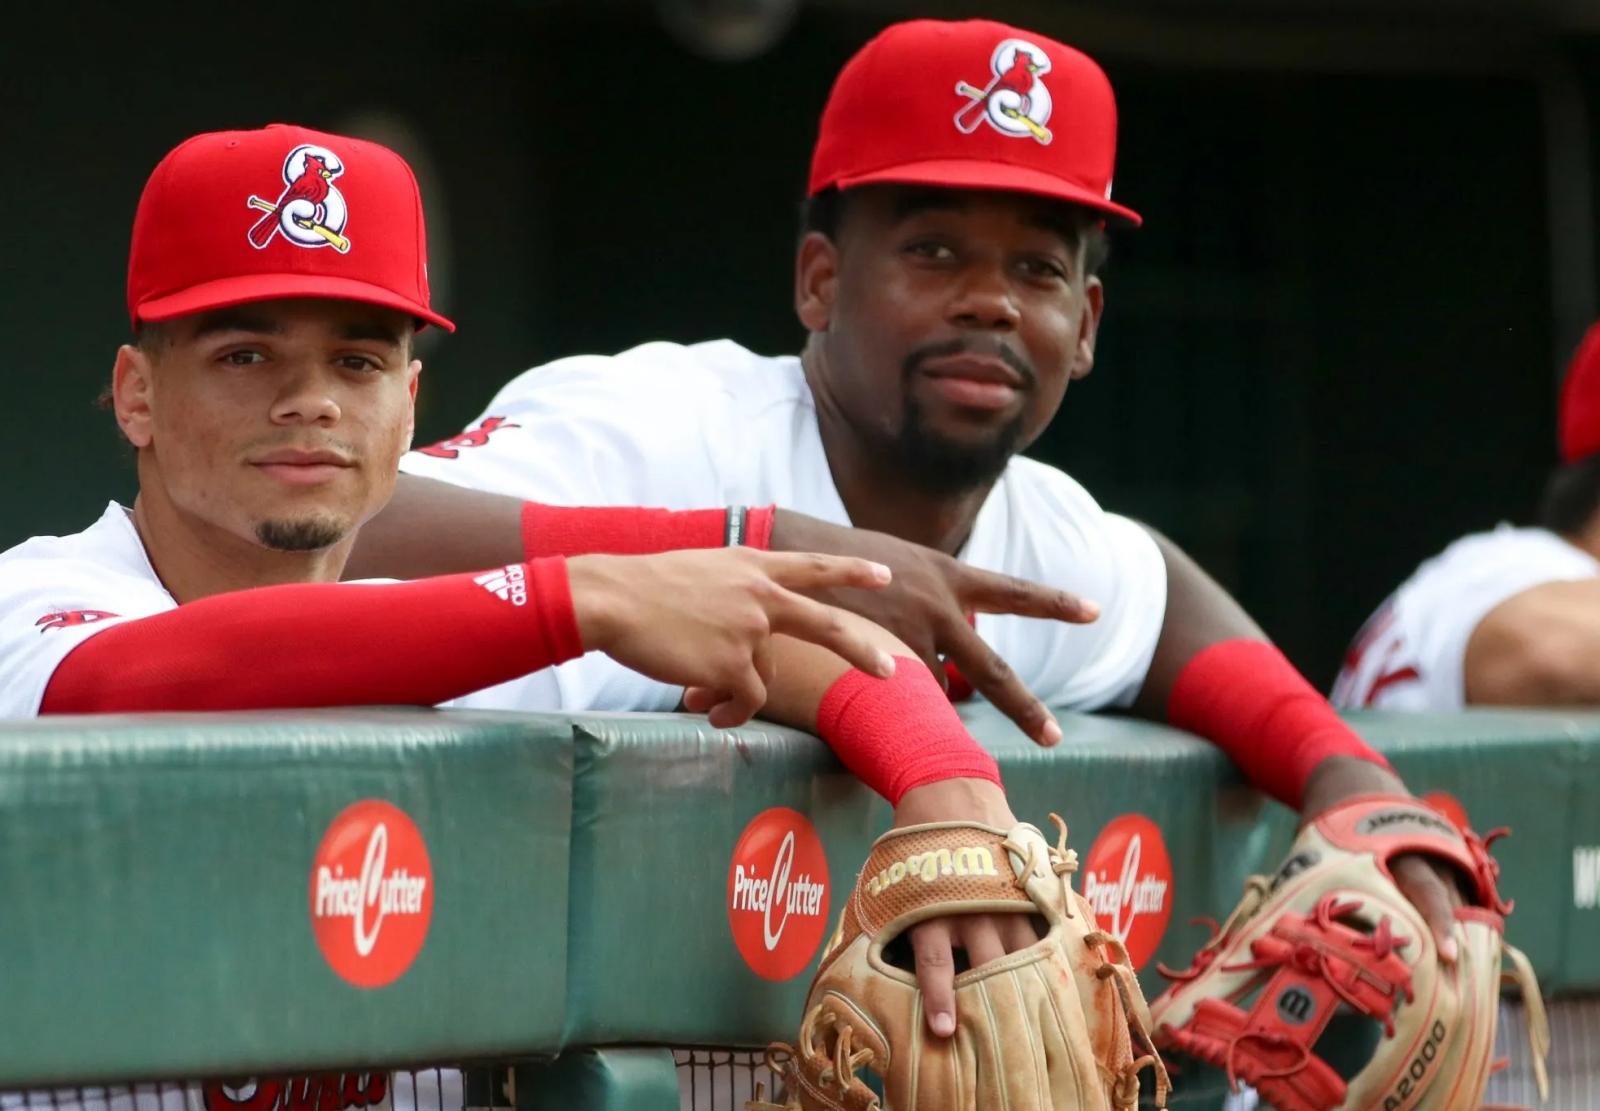 Masyn Winn (left) and Jordan Walker, both 20 years old and drafted in 2020, are top prospects in the St. Louis Cardinals organization. (Photo: PJ Maigi, Springfield Cardinals)